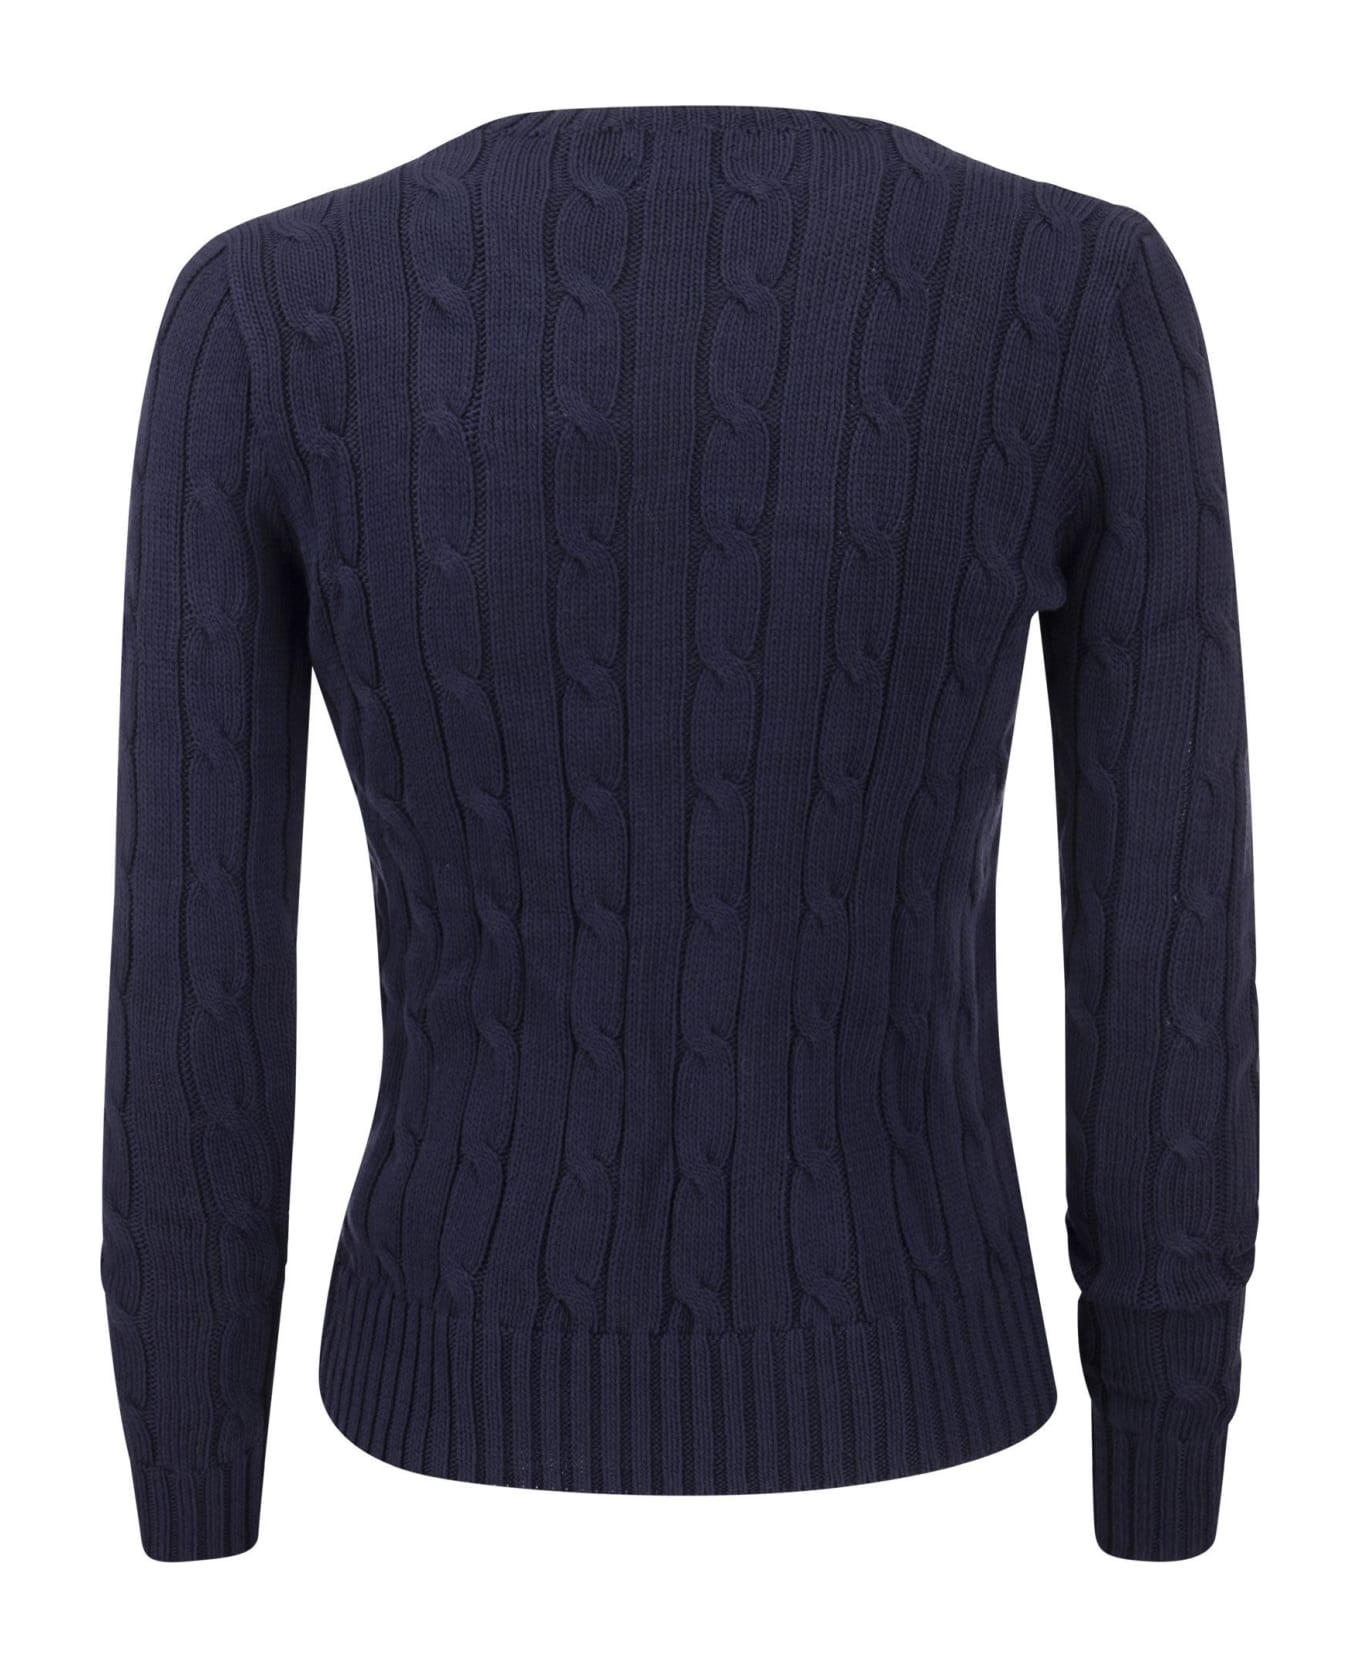 Polo Ralph Lauren Cable Knit Pullover With Contrasting Embroidered Logo - Navy Blue ニットウェア